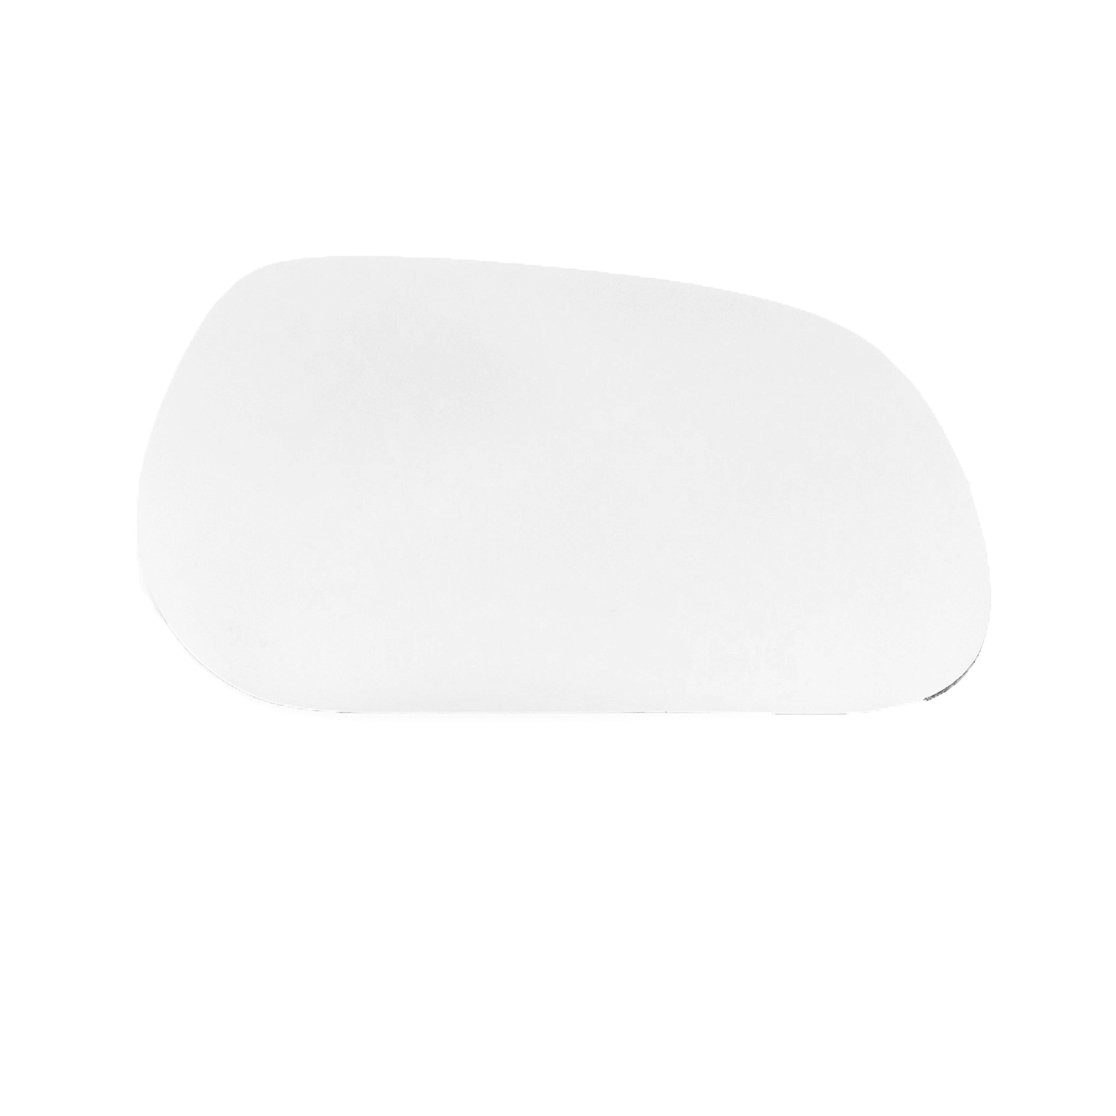 Toyota Verso Wing Mirror Glass LEFT HAND ( UK Passenger Side ) 2009 to 2012 – Convex Wing Mirror